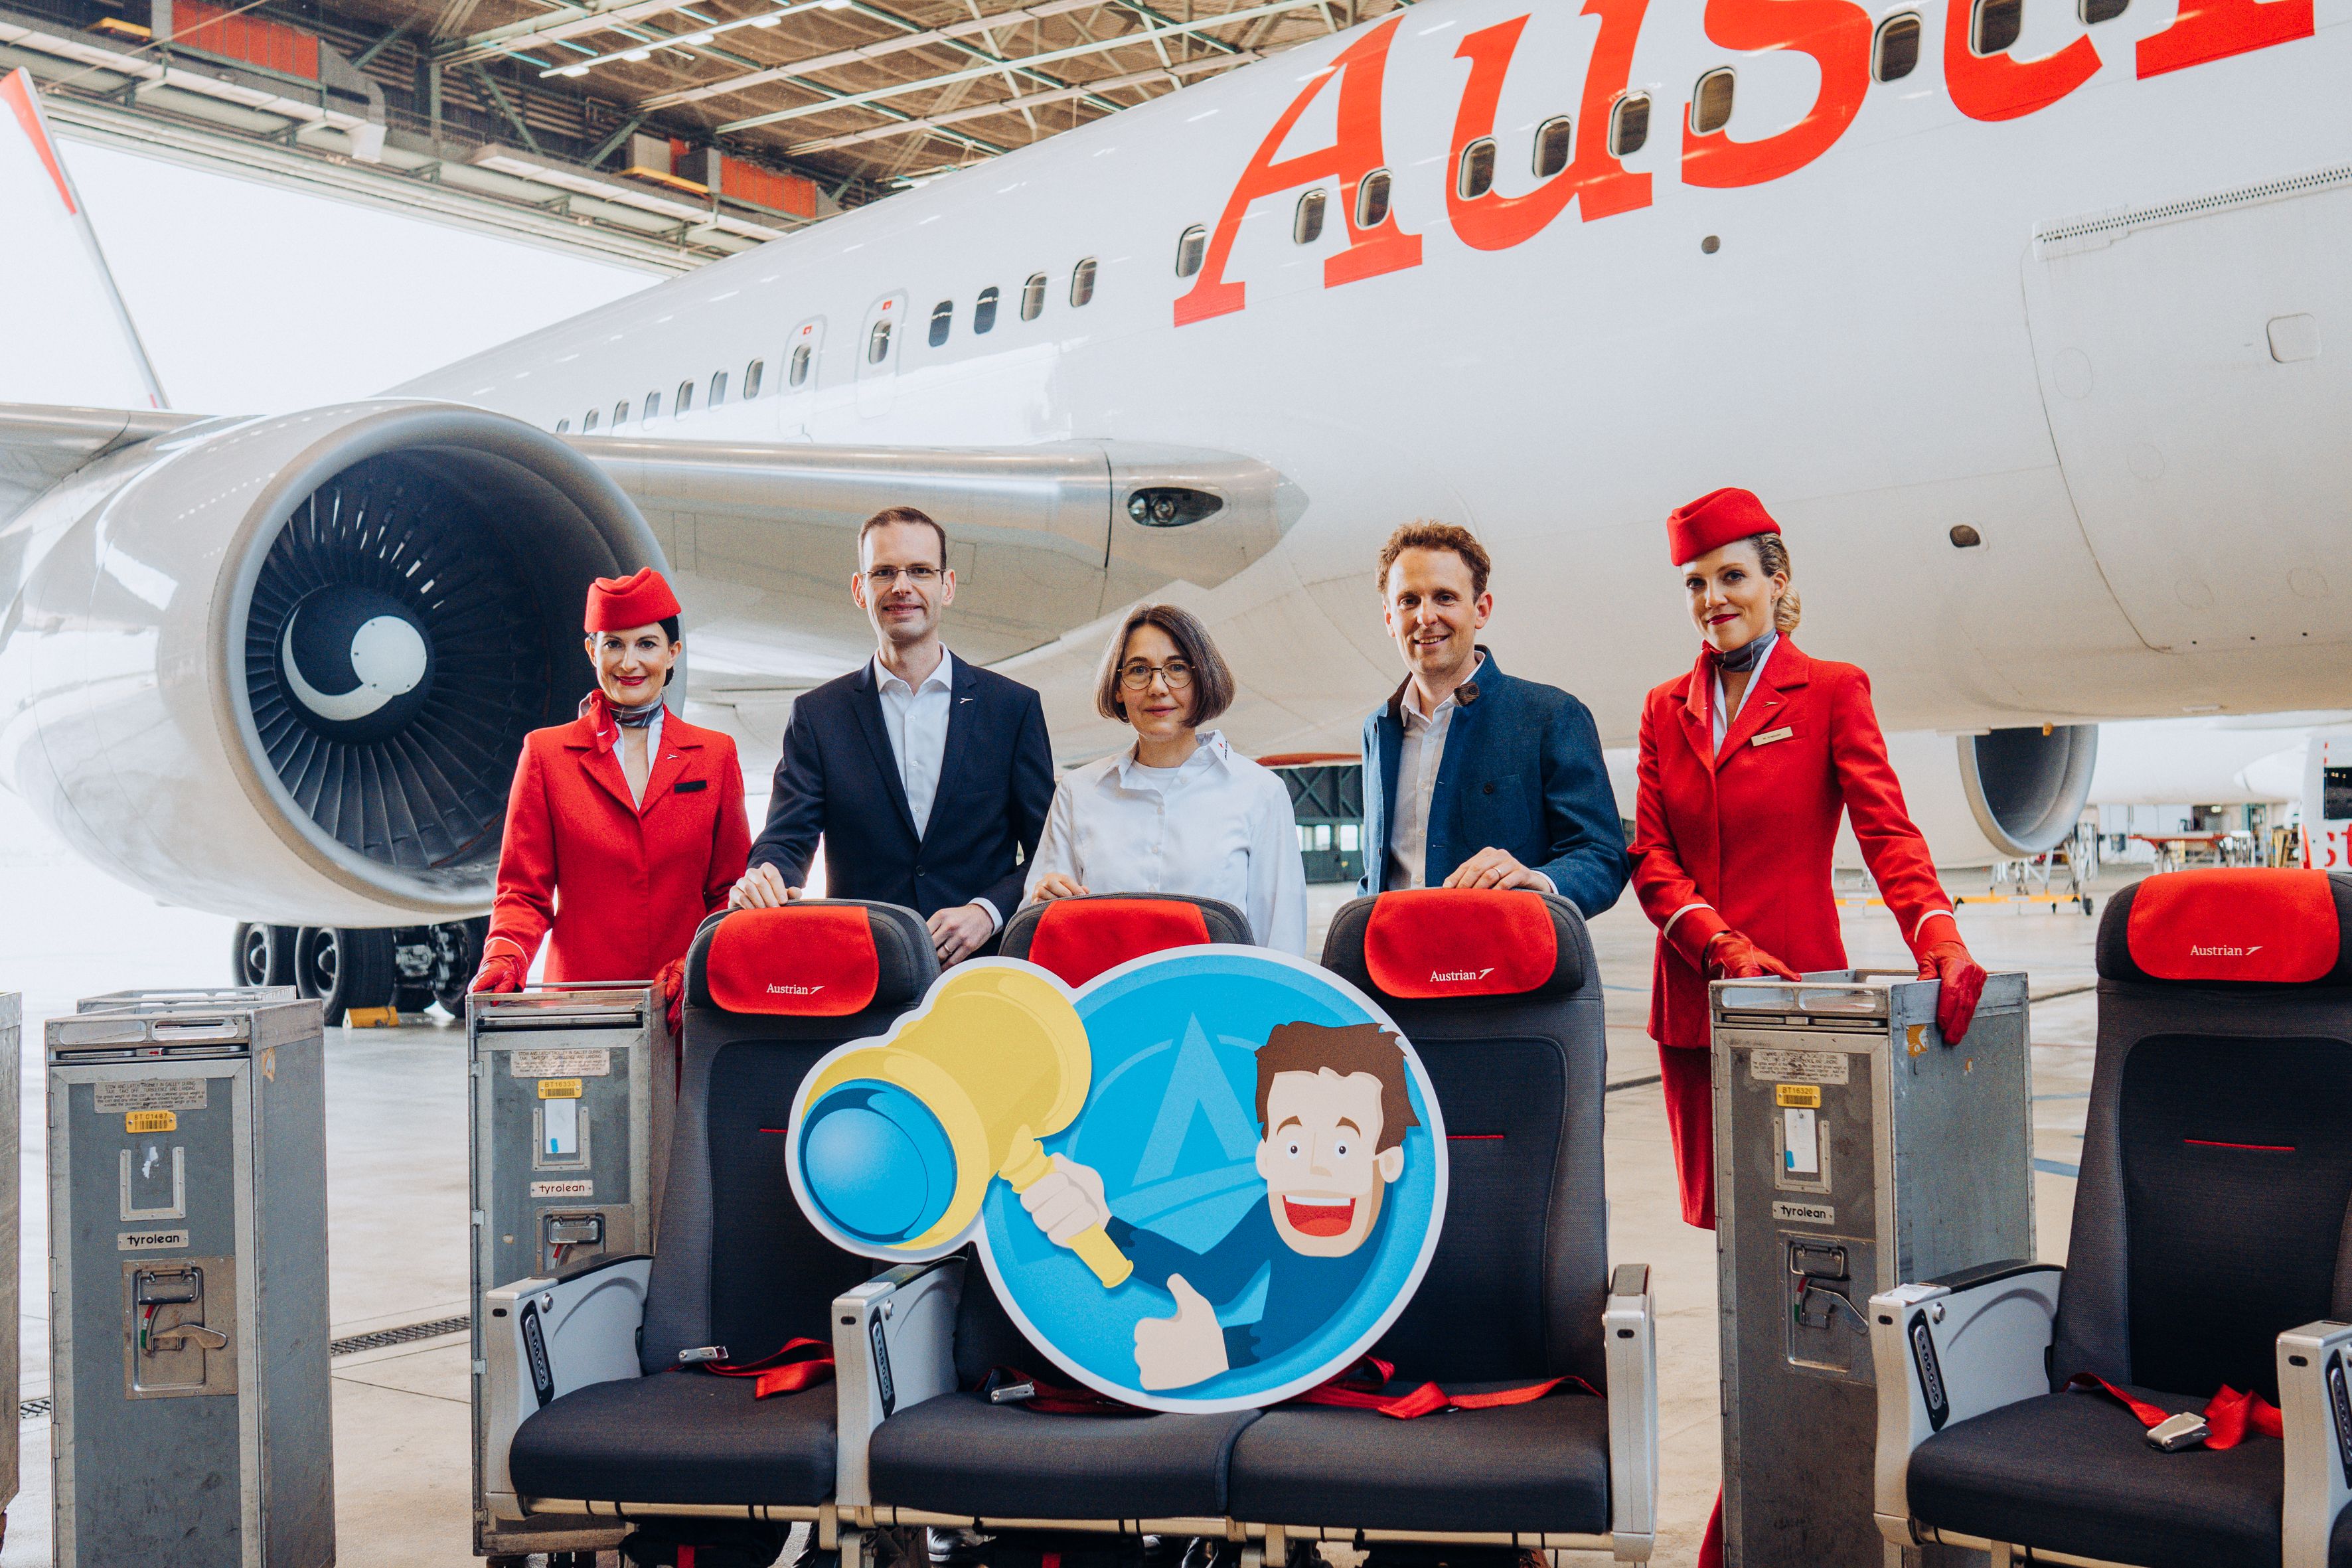 A group of Austrian Airlines employees standing in front of an aircraft with seats and trolleys